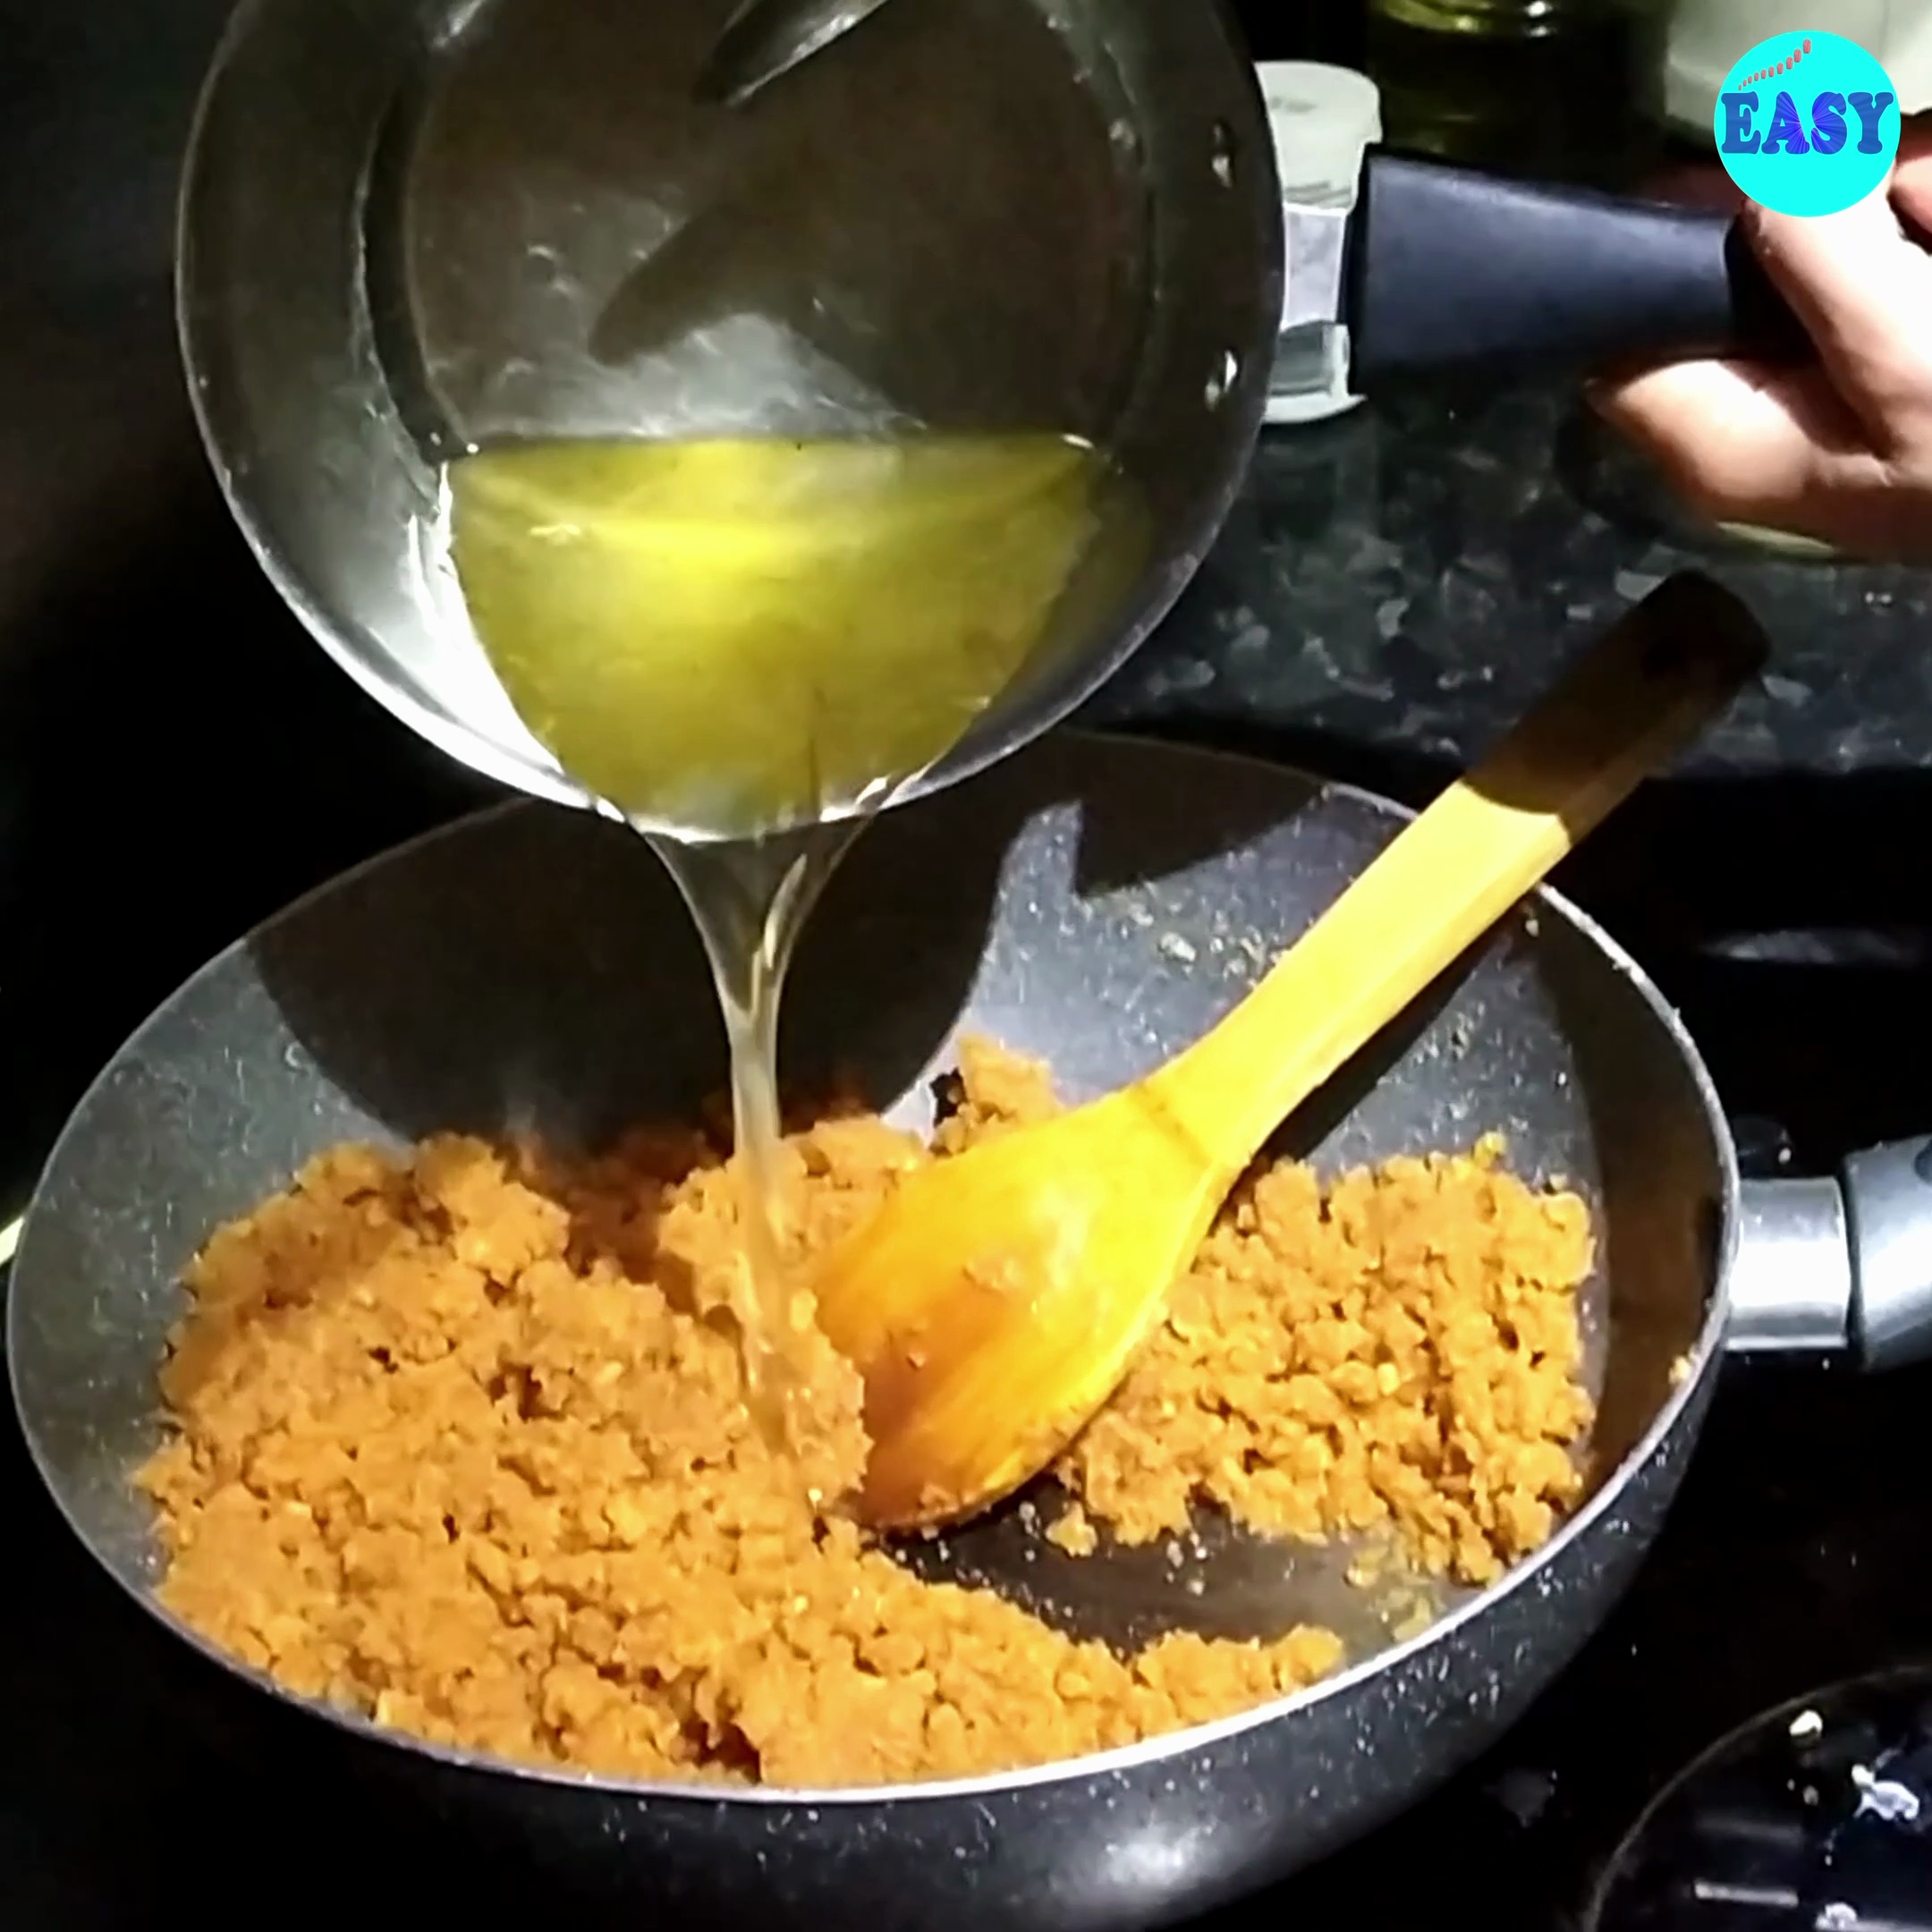 Step 9 - Once the milk is absorbed add the warm sugar syrup to the dal mixture. Stir well to combine the dal paste with the sugar syrup.